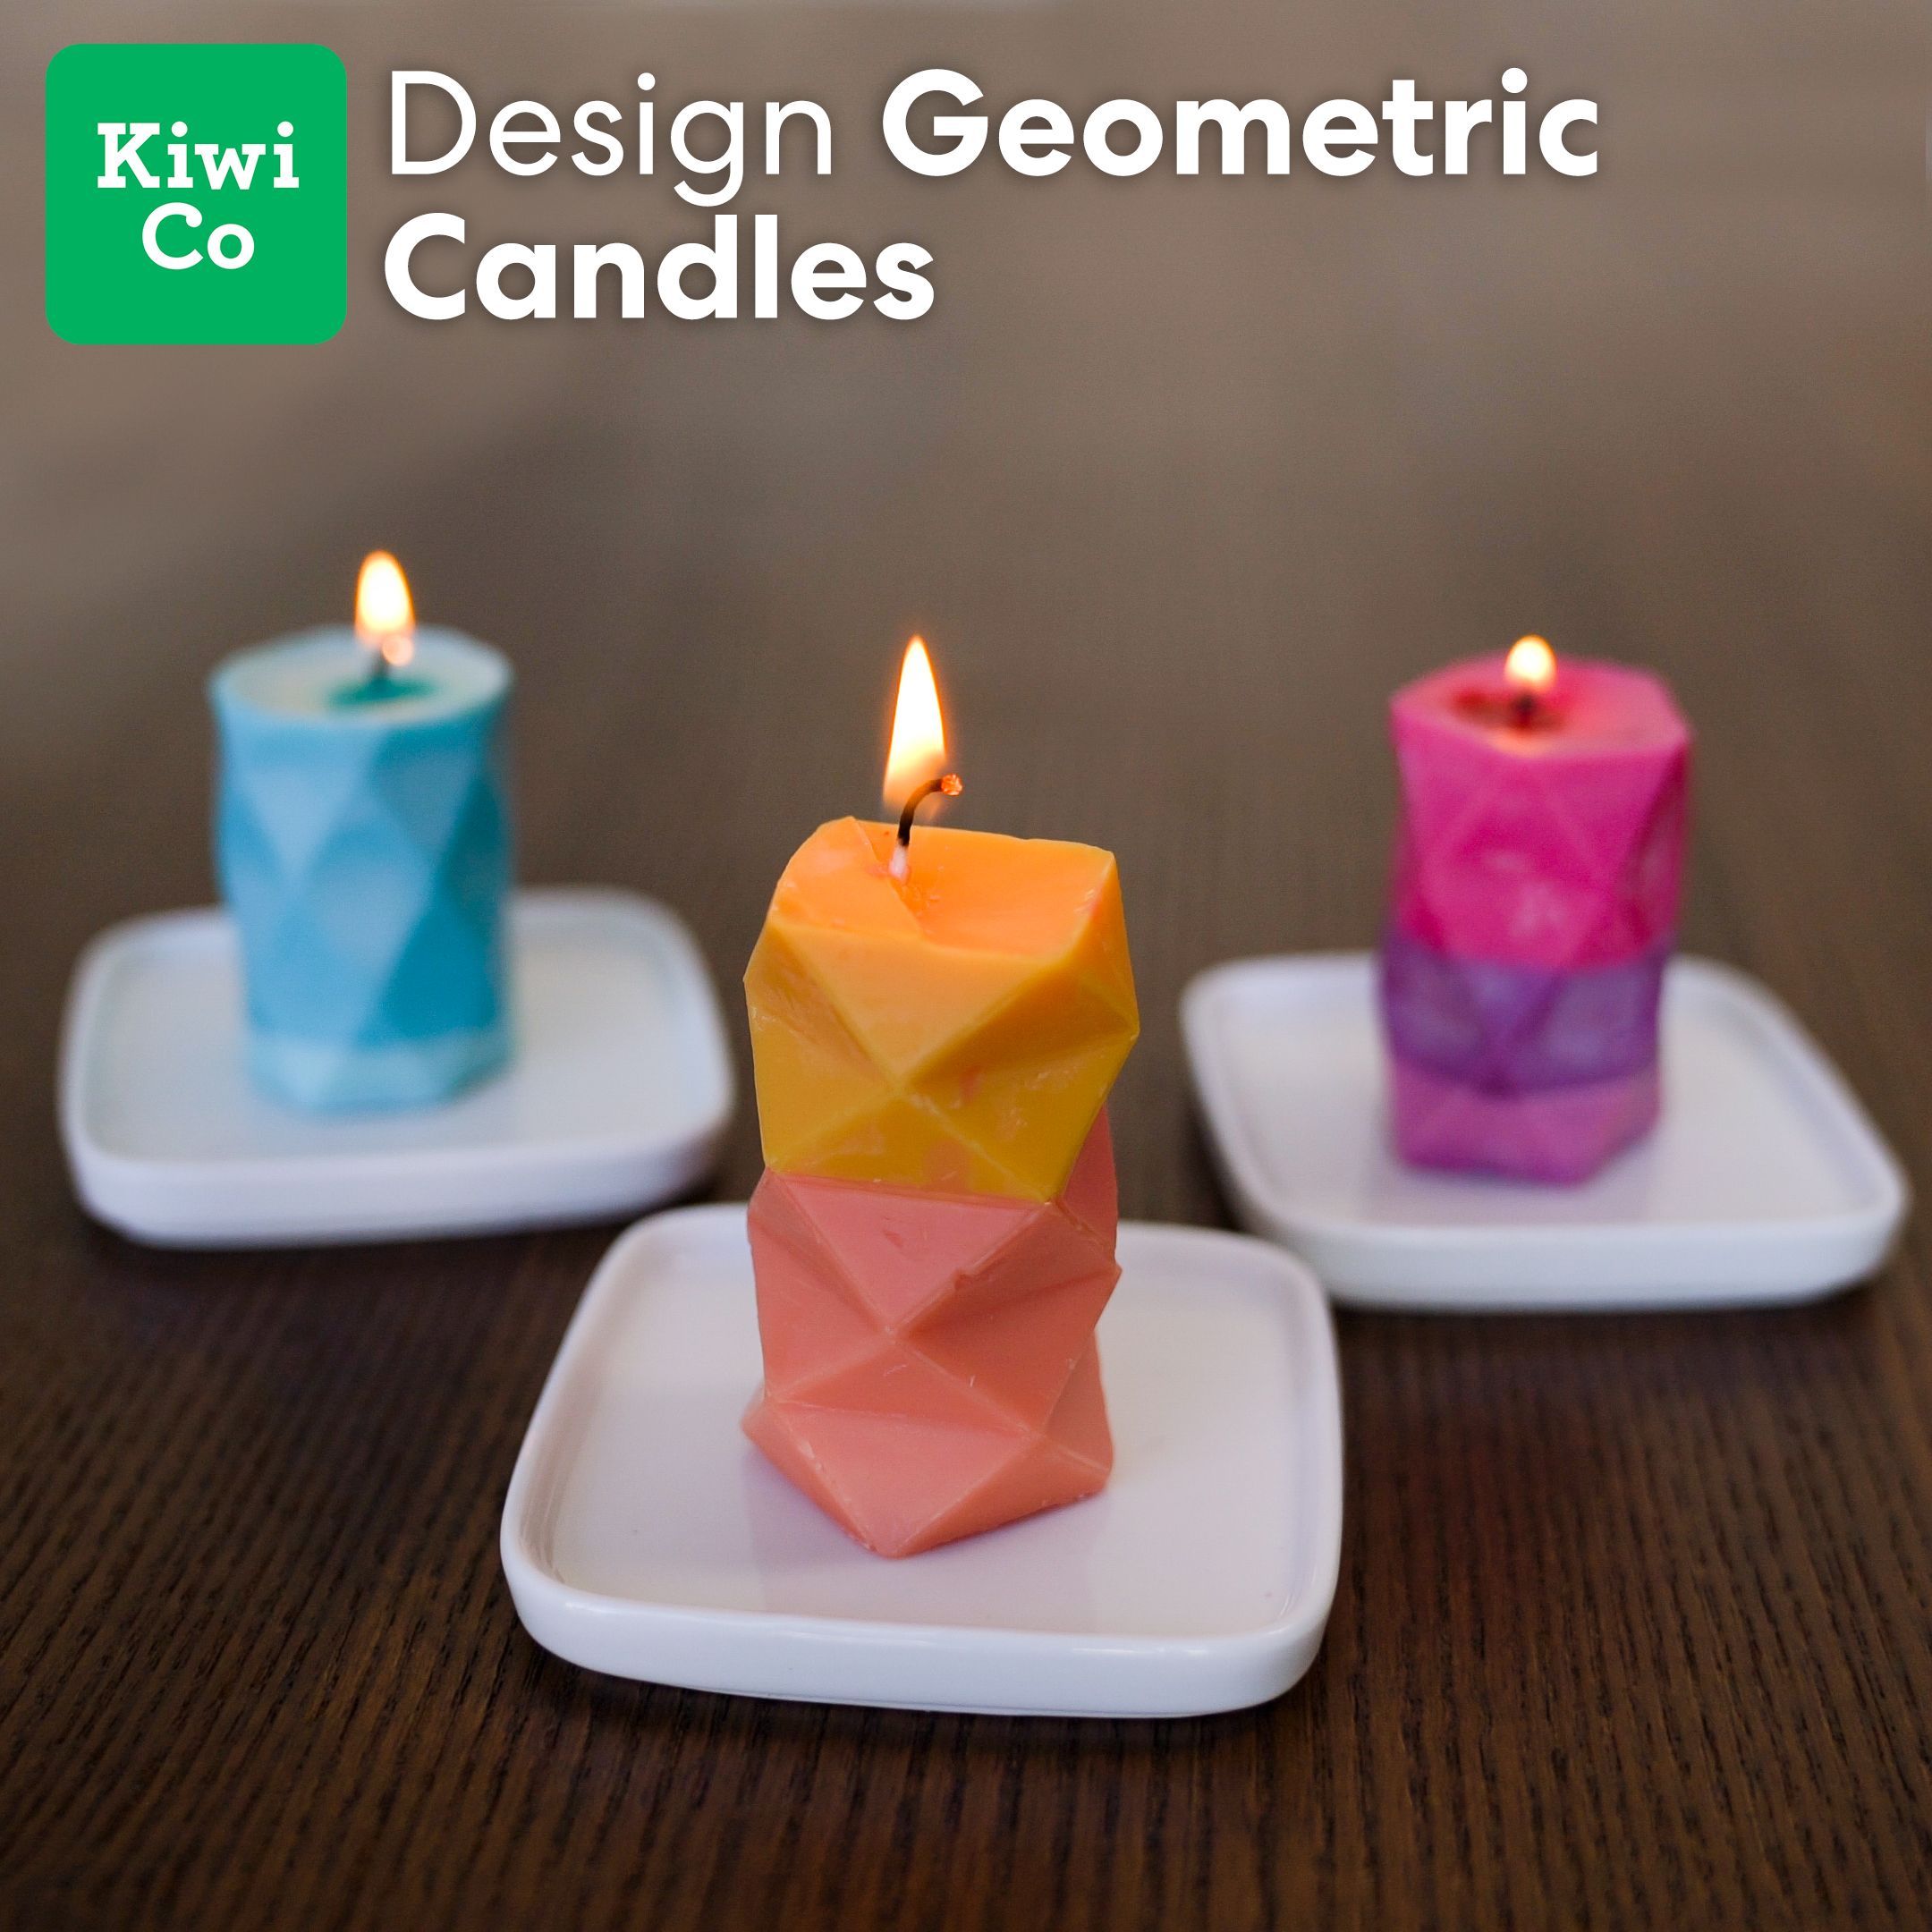 Geometric Candles by Doodle Crate - Geometric Candles by Doodle Crate -   17 diy Candles design ideas